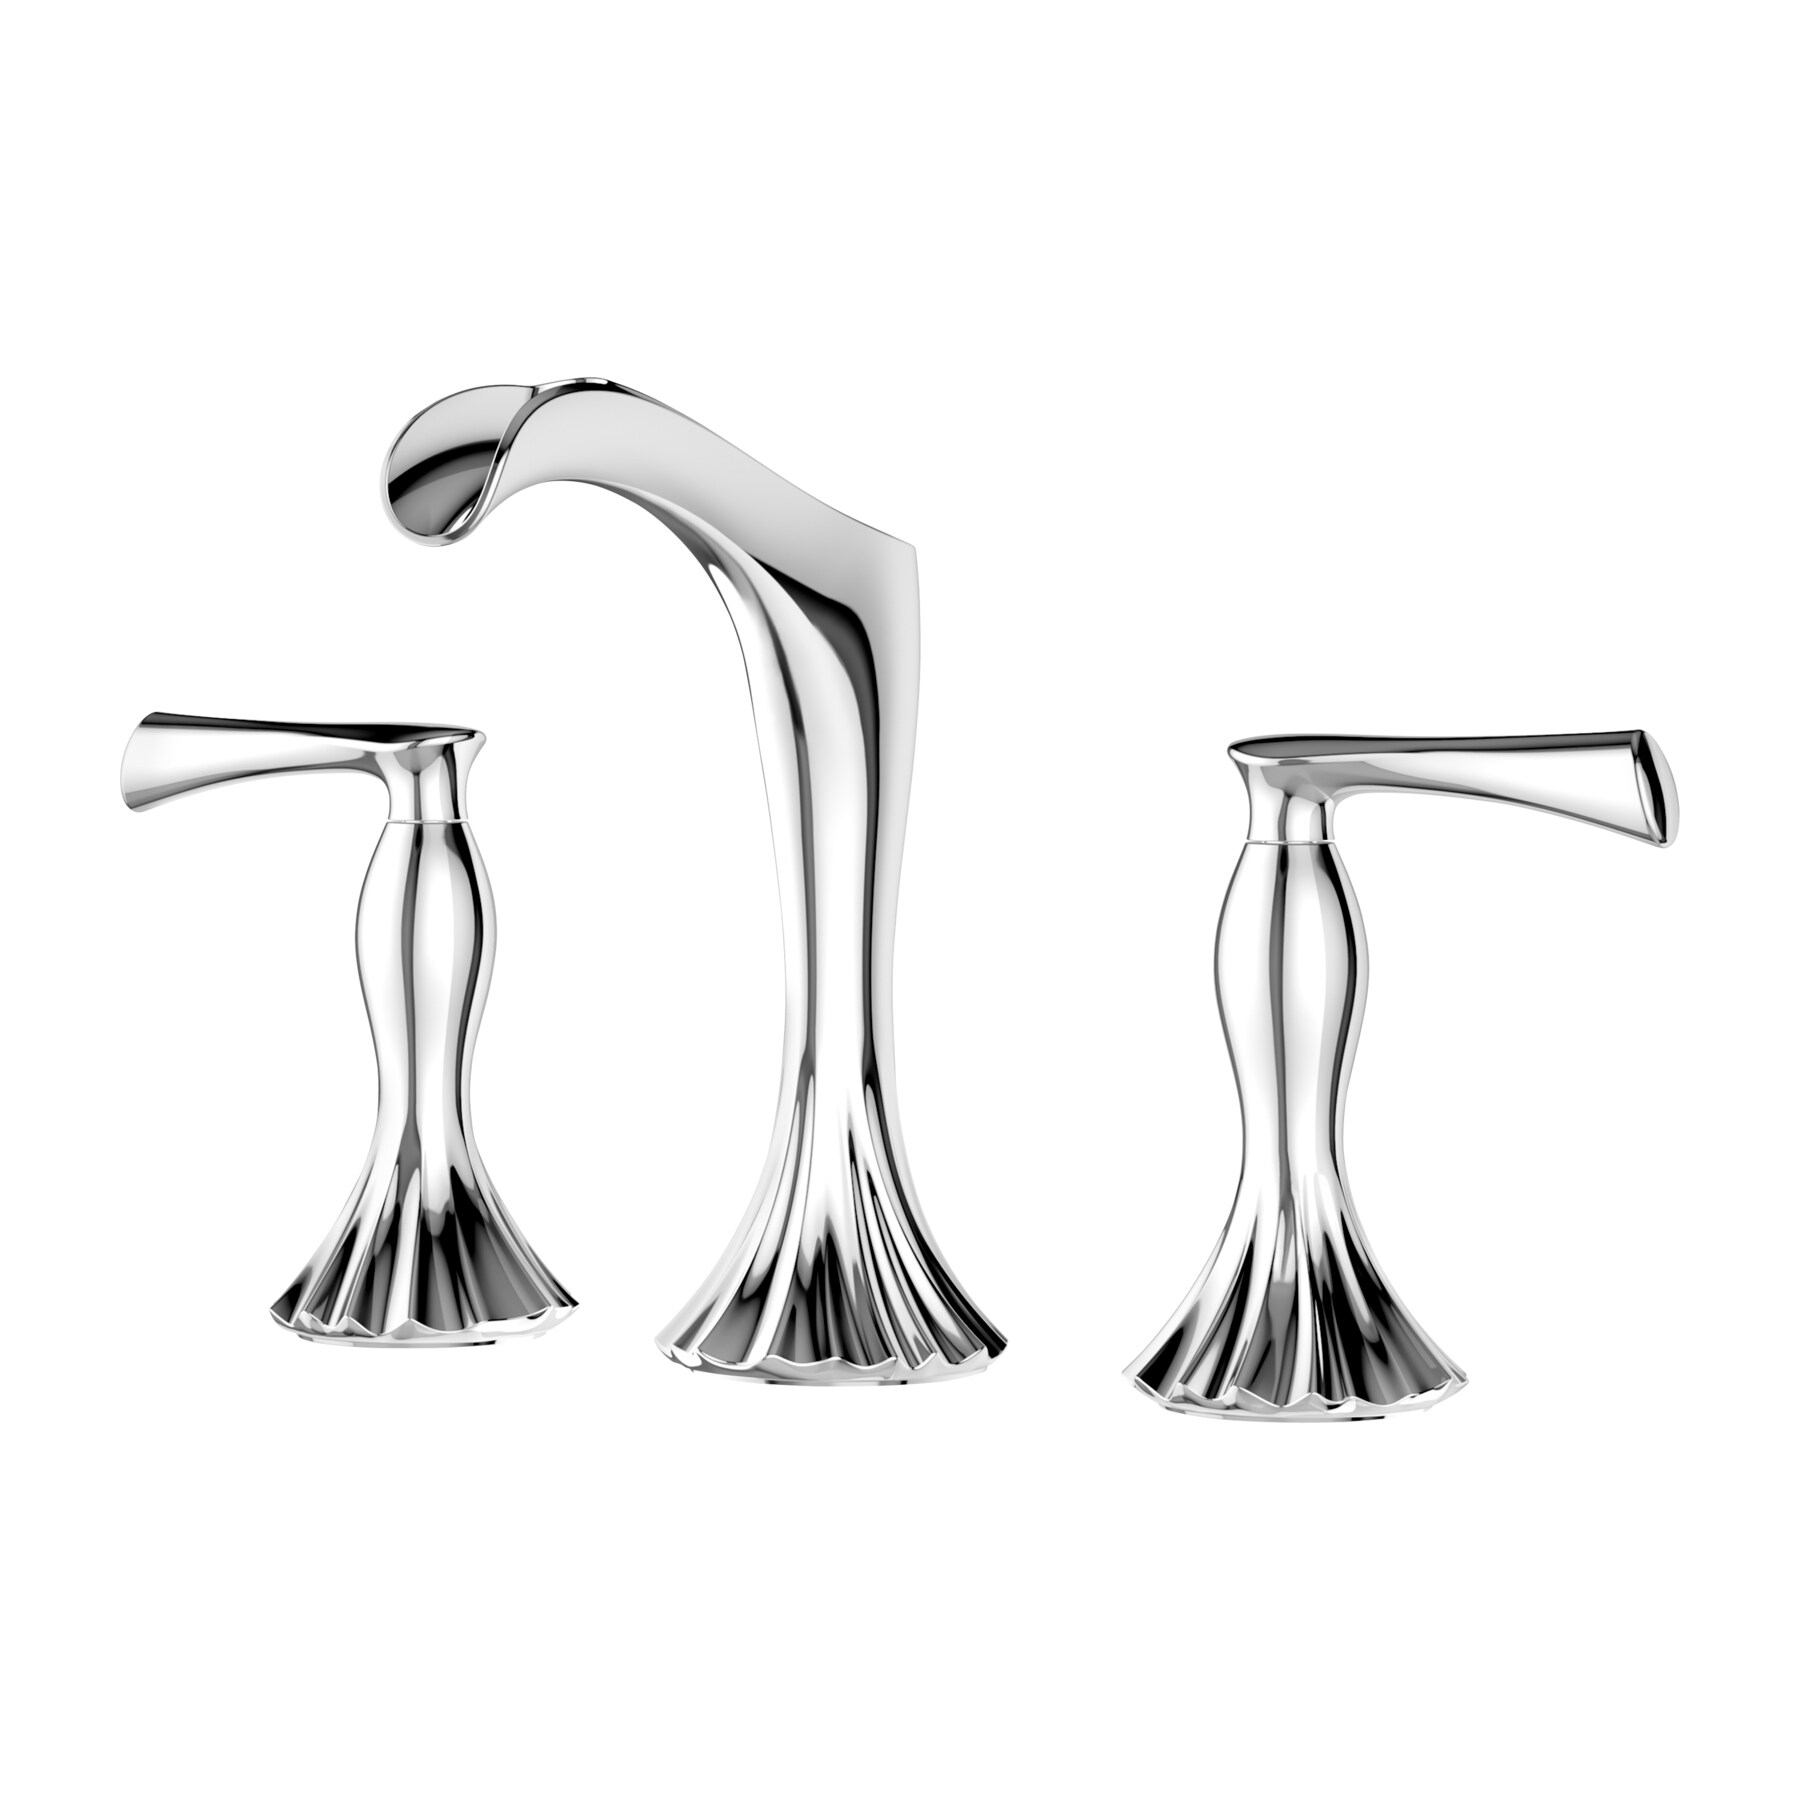 Pfister Rhen Polished Chrome 2-handle Widespread WaterSense Low-arc  Bathroom Sink Faucet with Drain